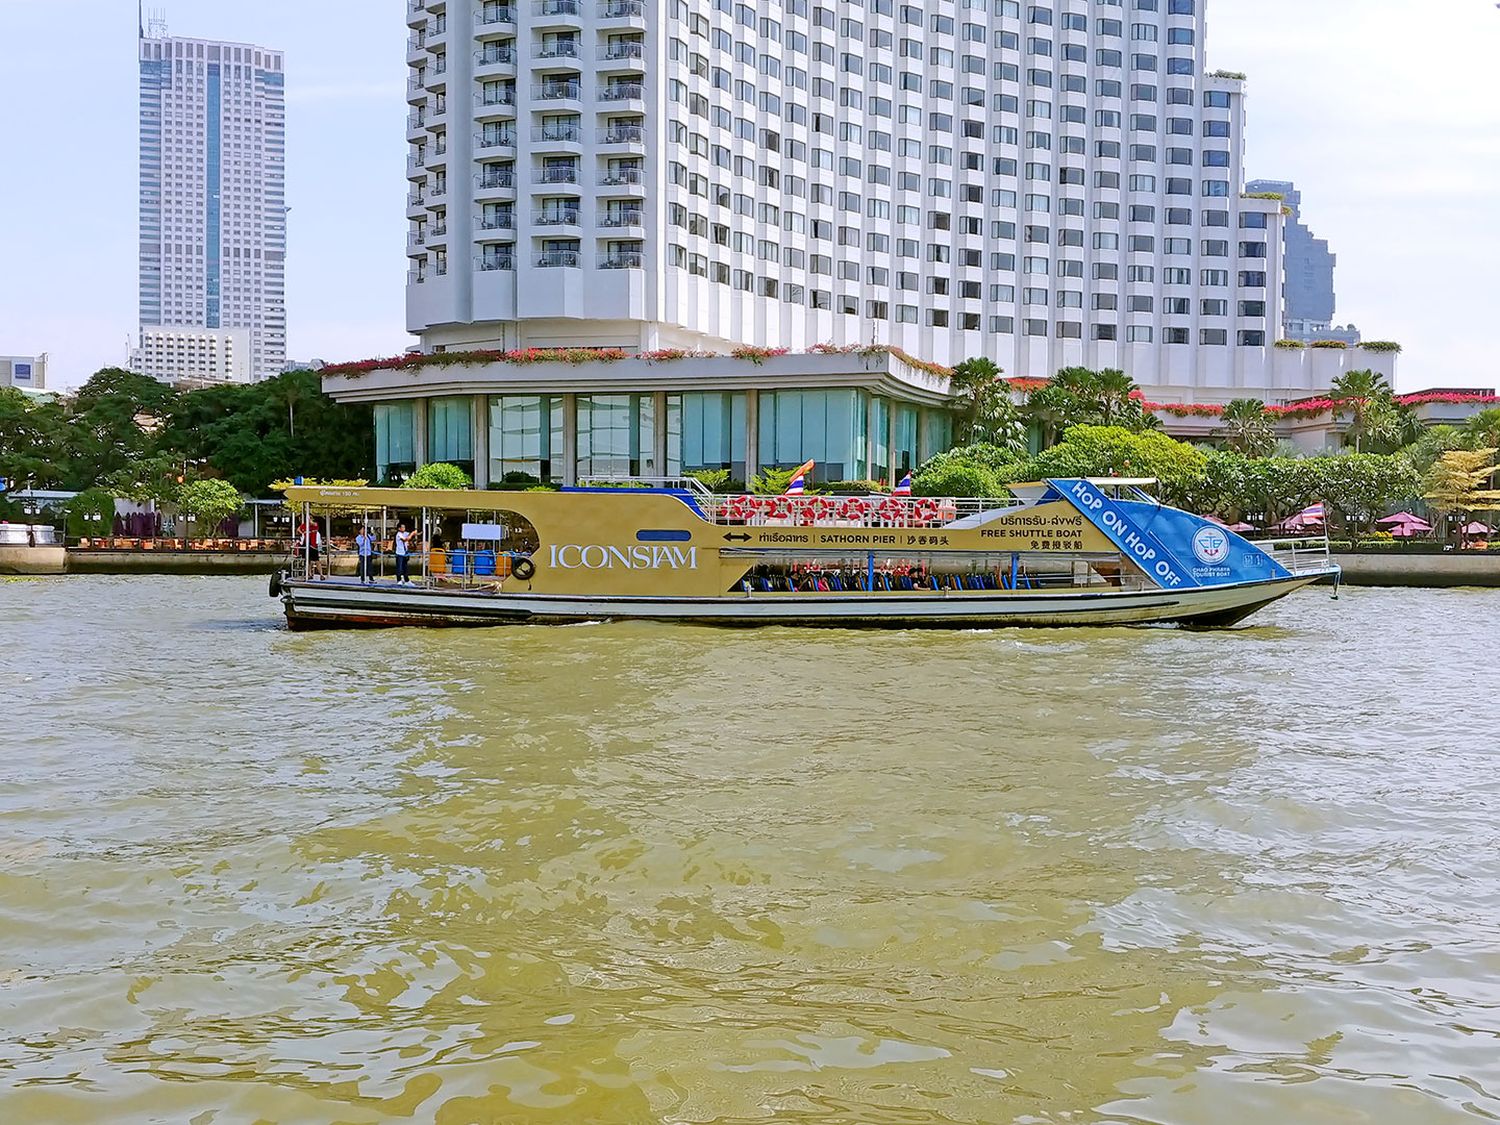 Meet the ultimate traveling experience at ICONSIAM”